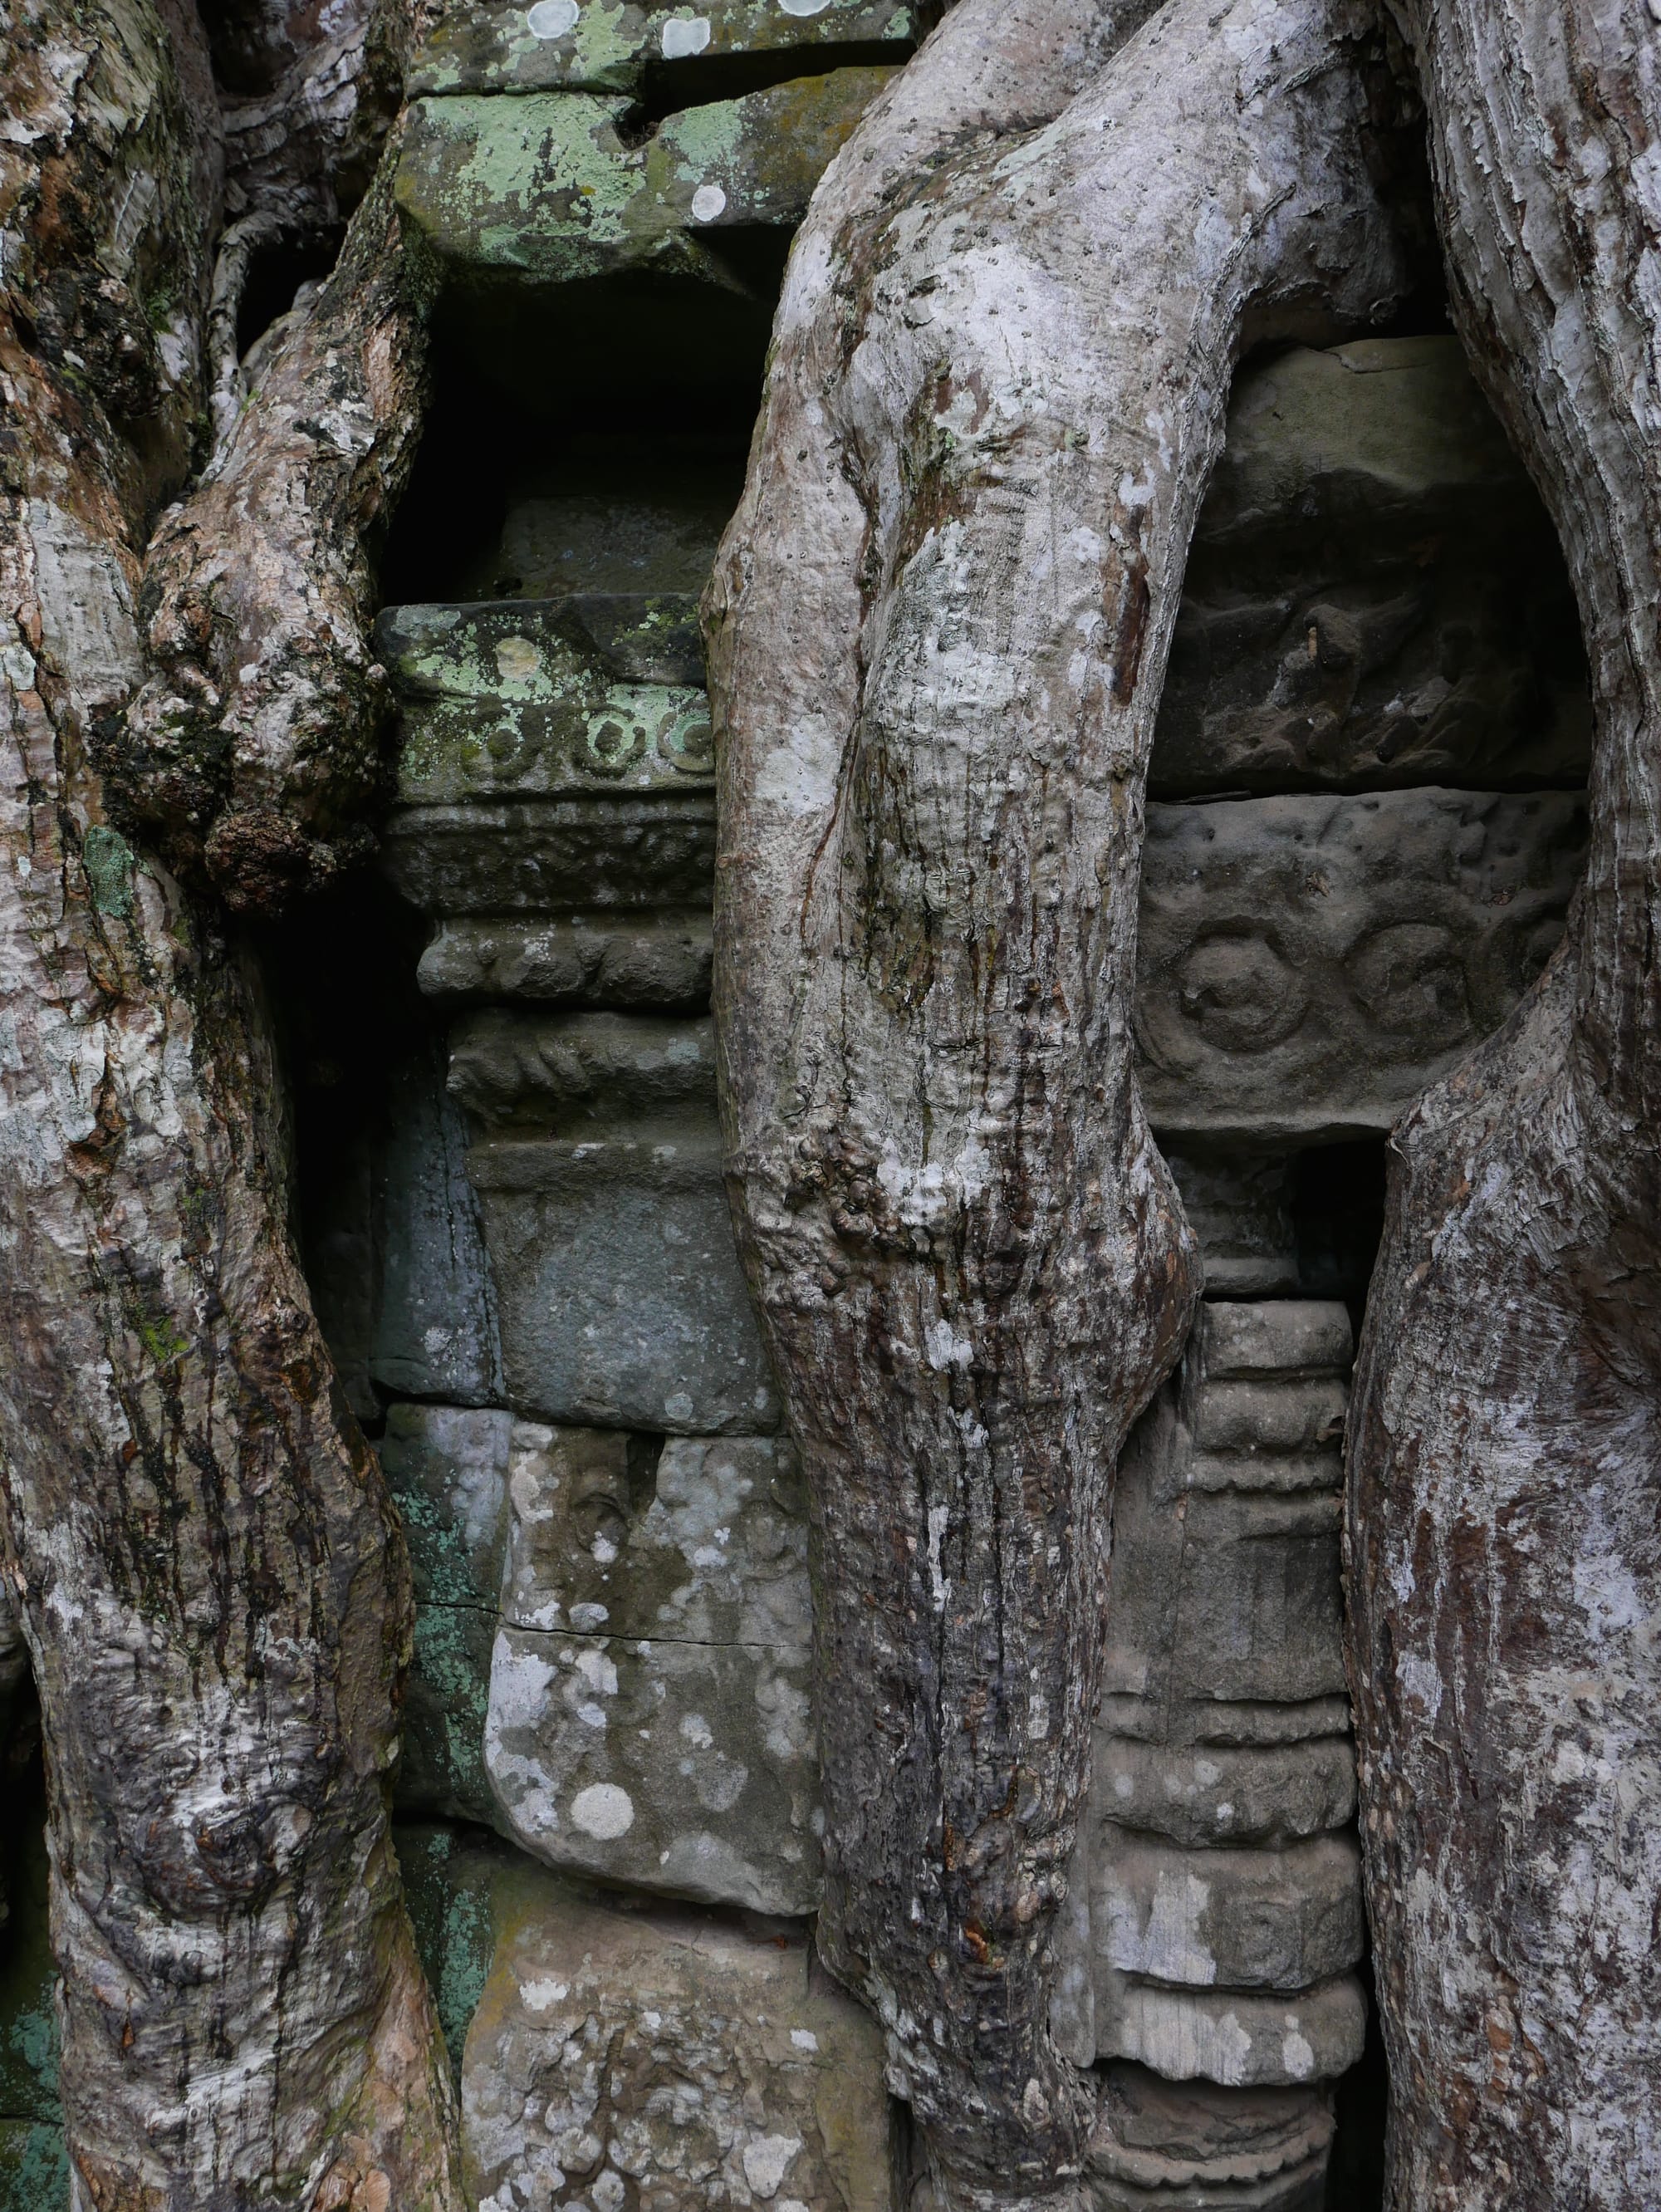 Photo by Author — trees growing over the stonework at Ta Prohm (ប្រាសាទតាព្រហ្ម), Angkor Archaeological Park, Angkor, Cambodia